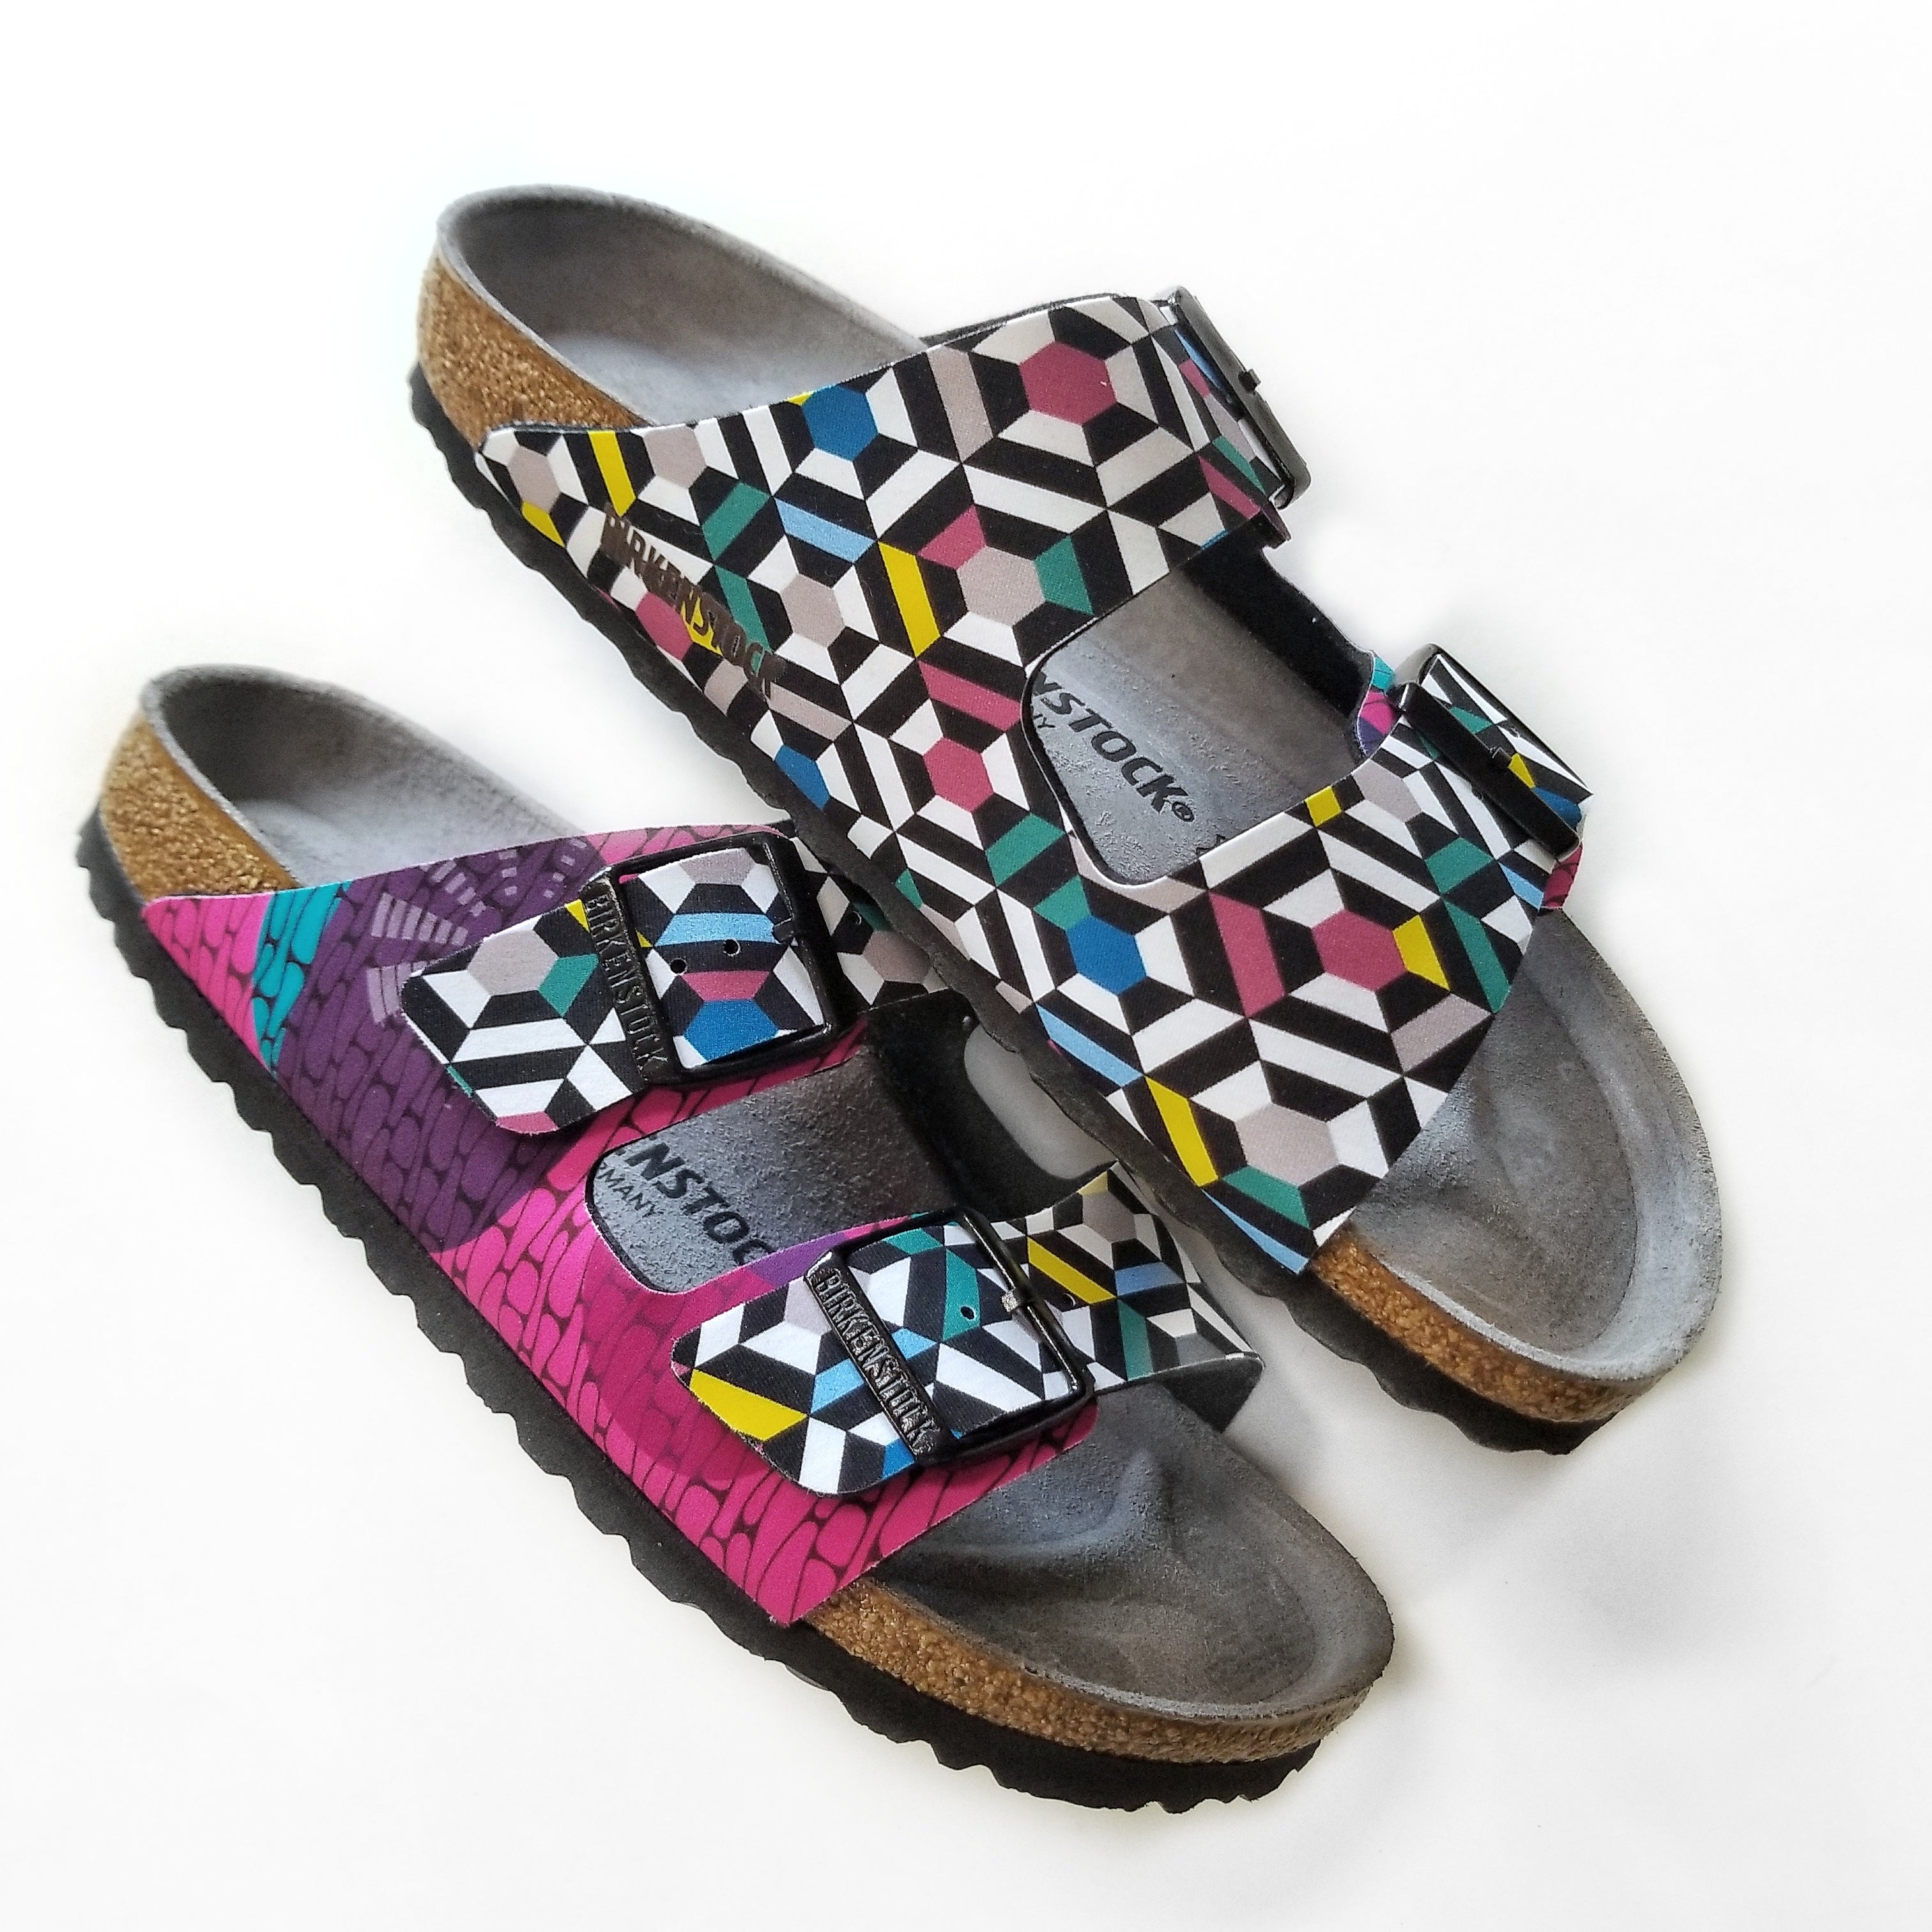 Patterns and Colors Galore! HOLIDAY 2018: The Birkenstock Arizona in Sonar Geometric Pink